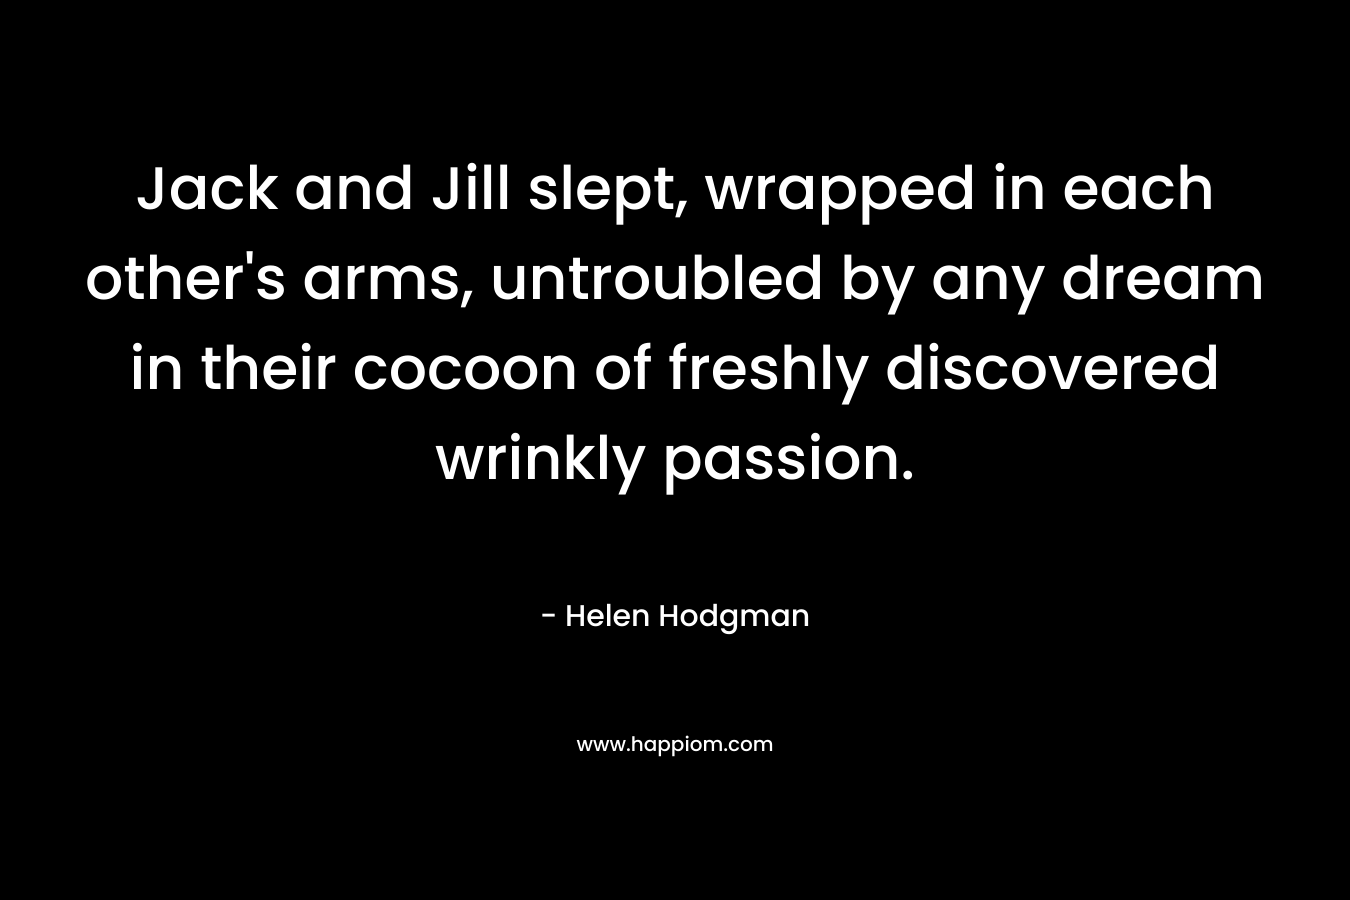 Jack and Jill slept, wrapped in each other's arms, untroubled by any dream in their cocoon of freshly discovered wrinkly passion.